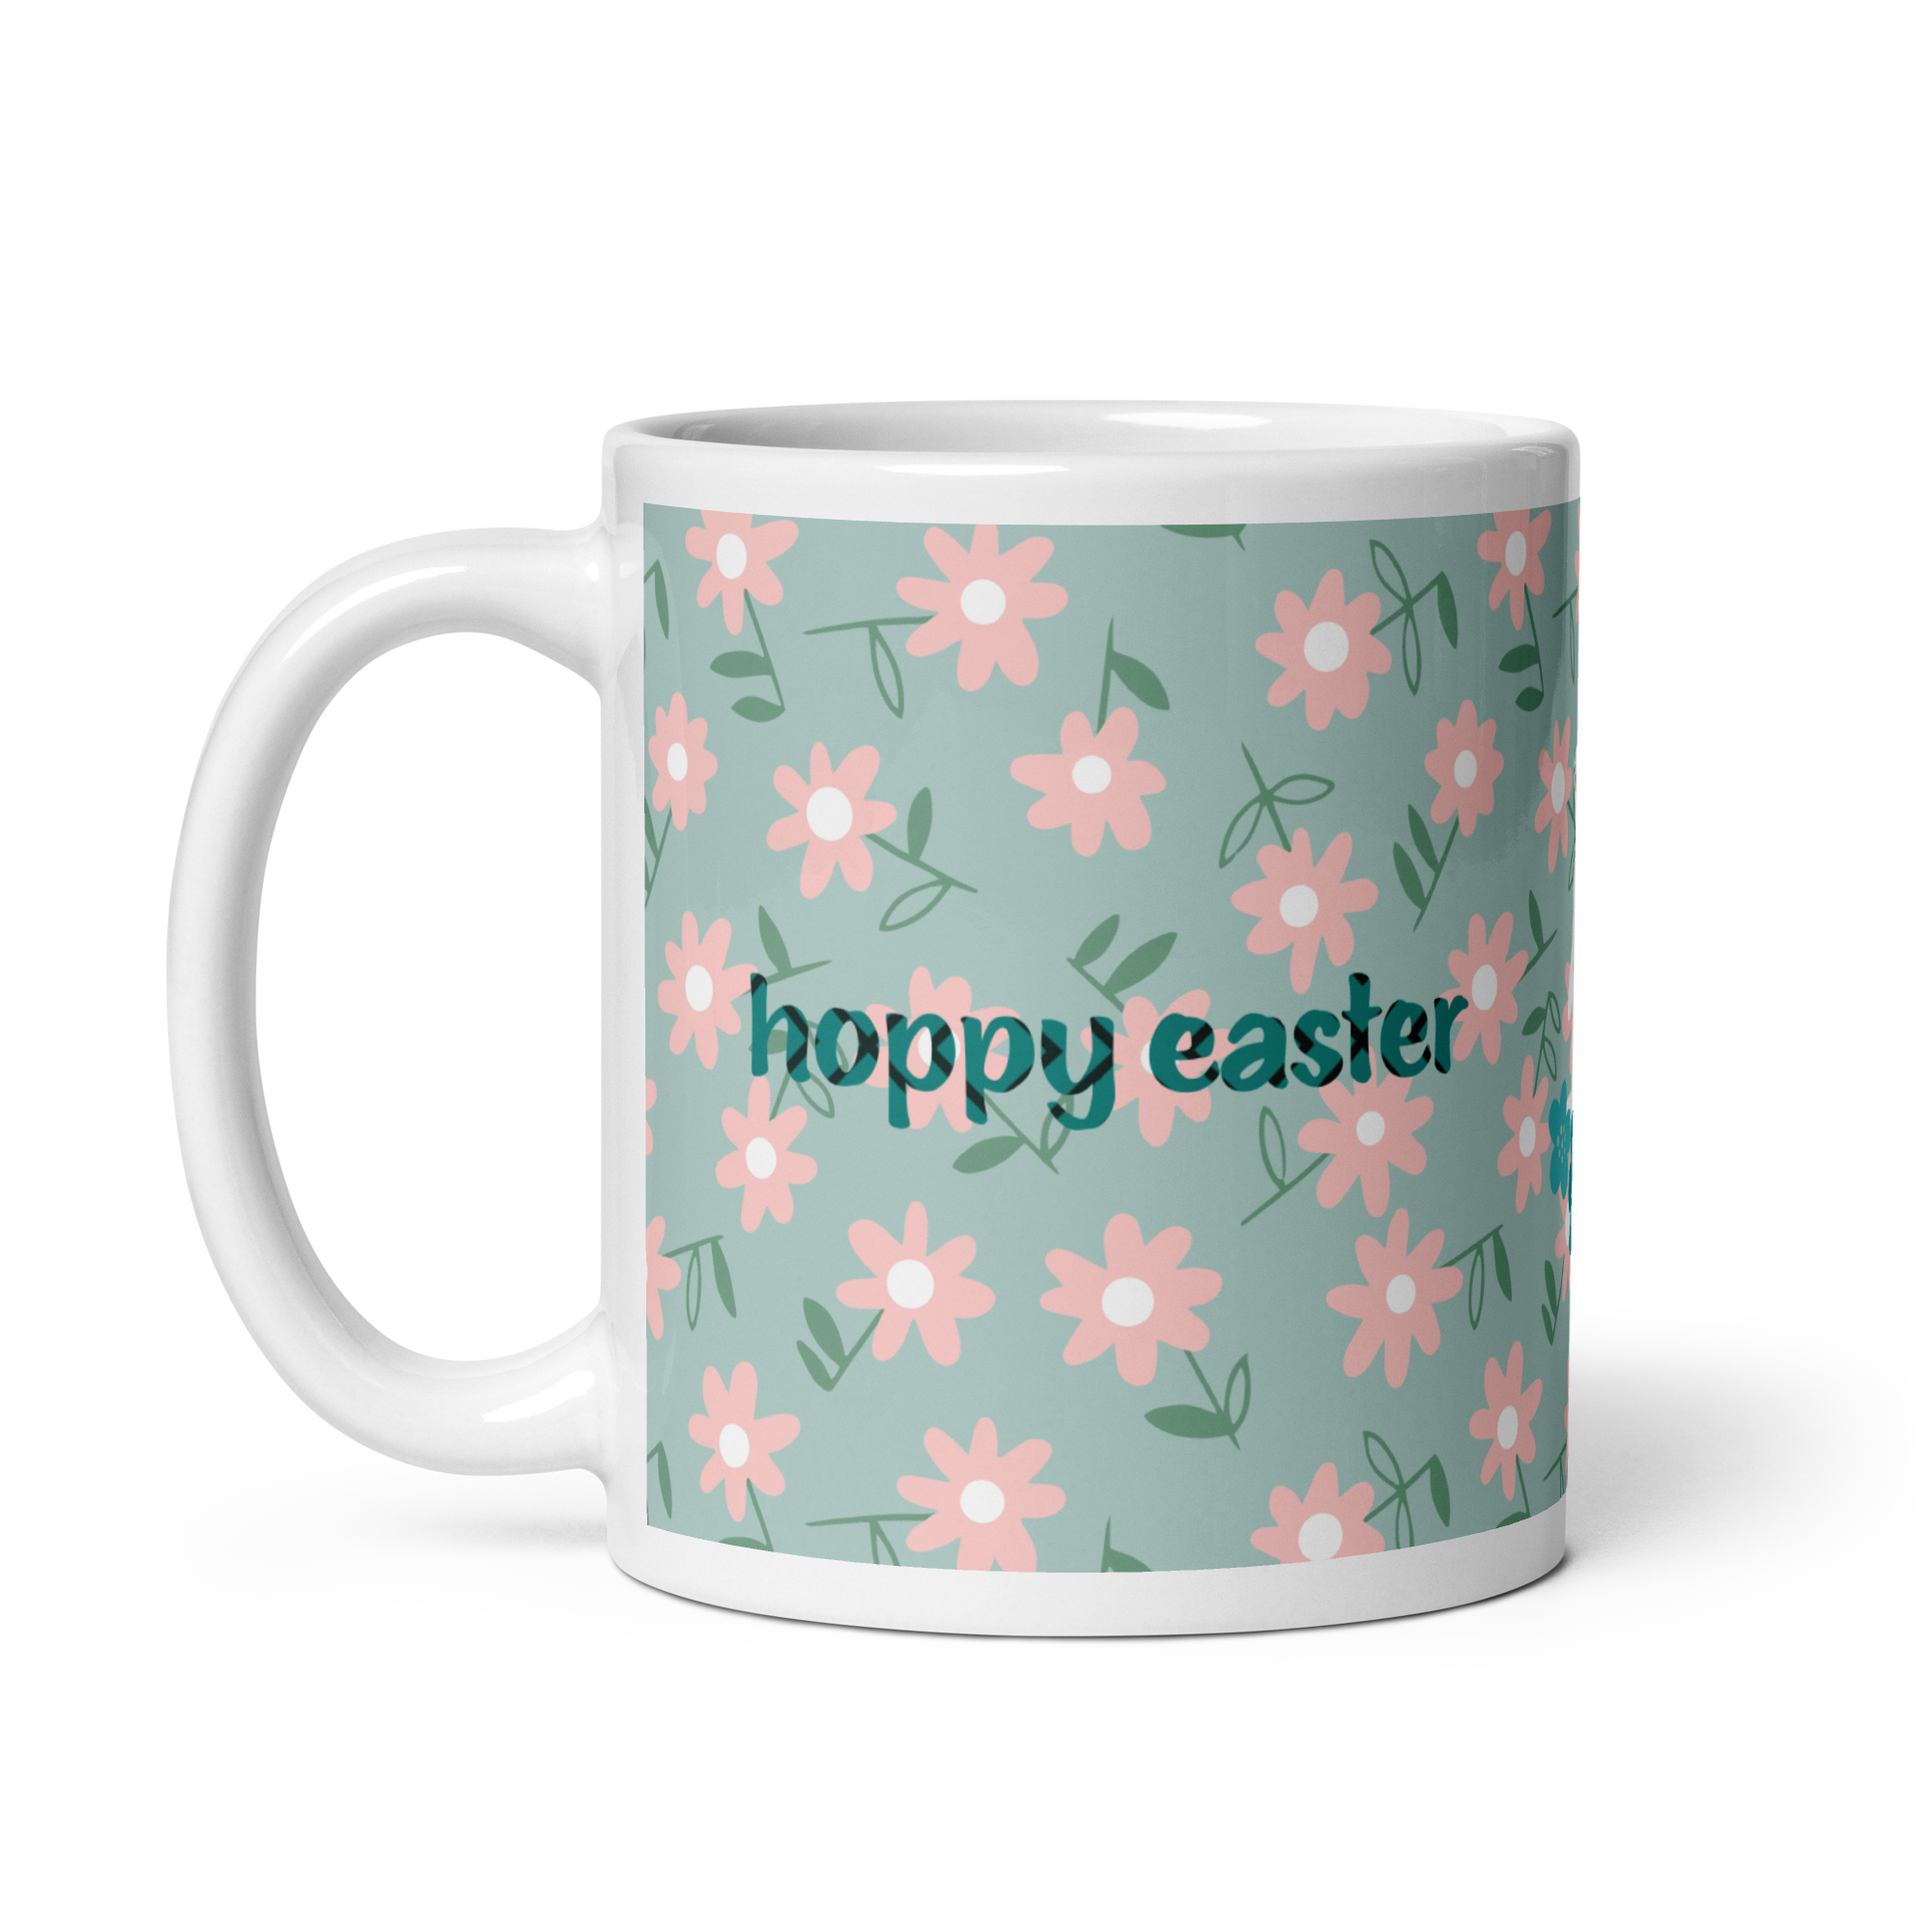 Happy Easter Every Bunny! Cup